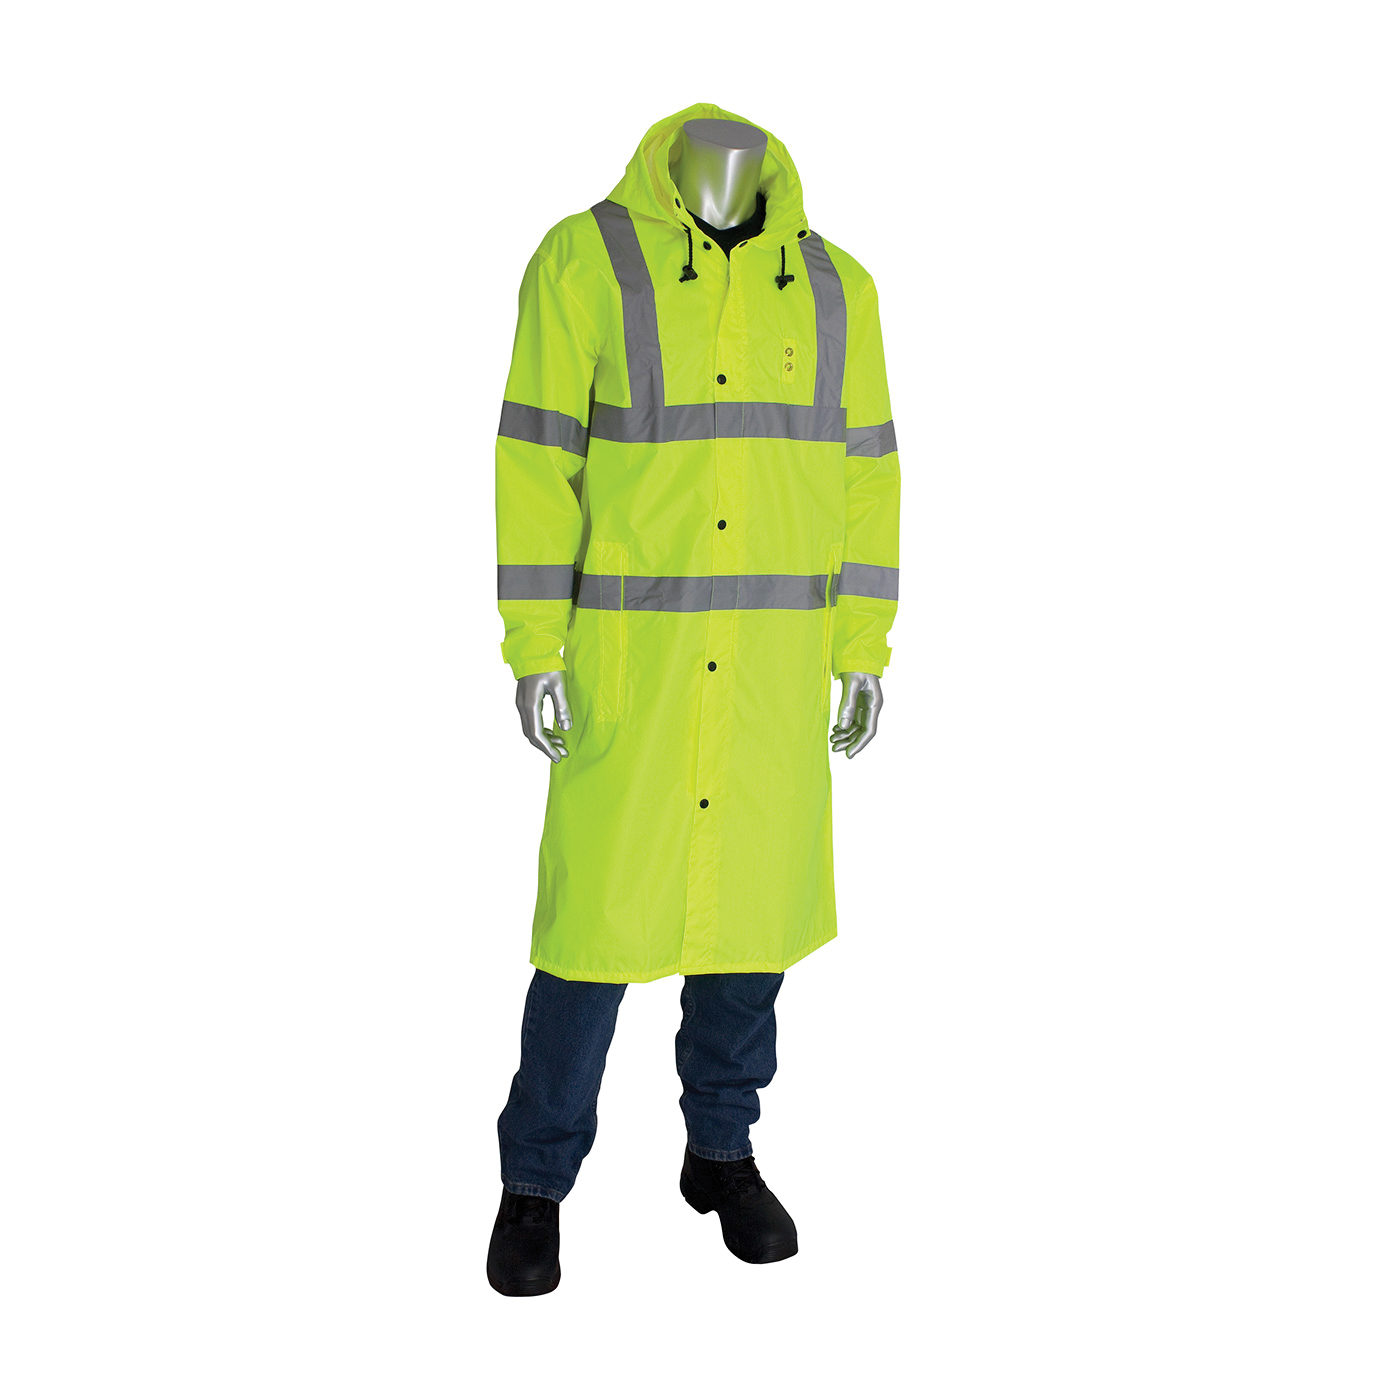 PIP® FALCON™ Viz™ 353-1048-LY/L All Purpose Waterproof Rain Coat, L, Hi-Viz Lime Yellow, 150D Polyester Coated with Polyurethane, Resists: Water, ANSI 107 Type R Class 3, Concealed Hood